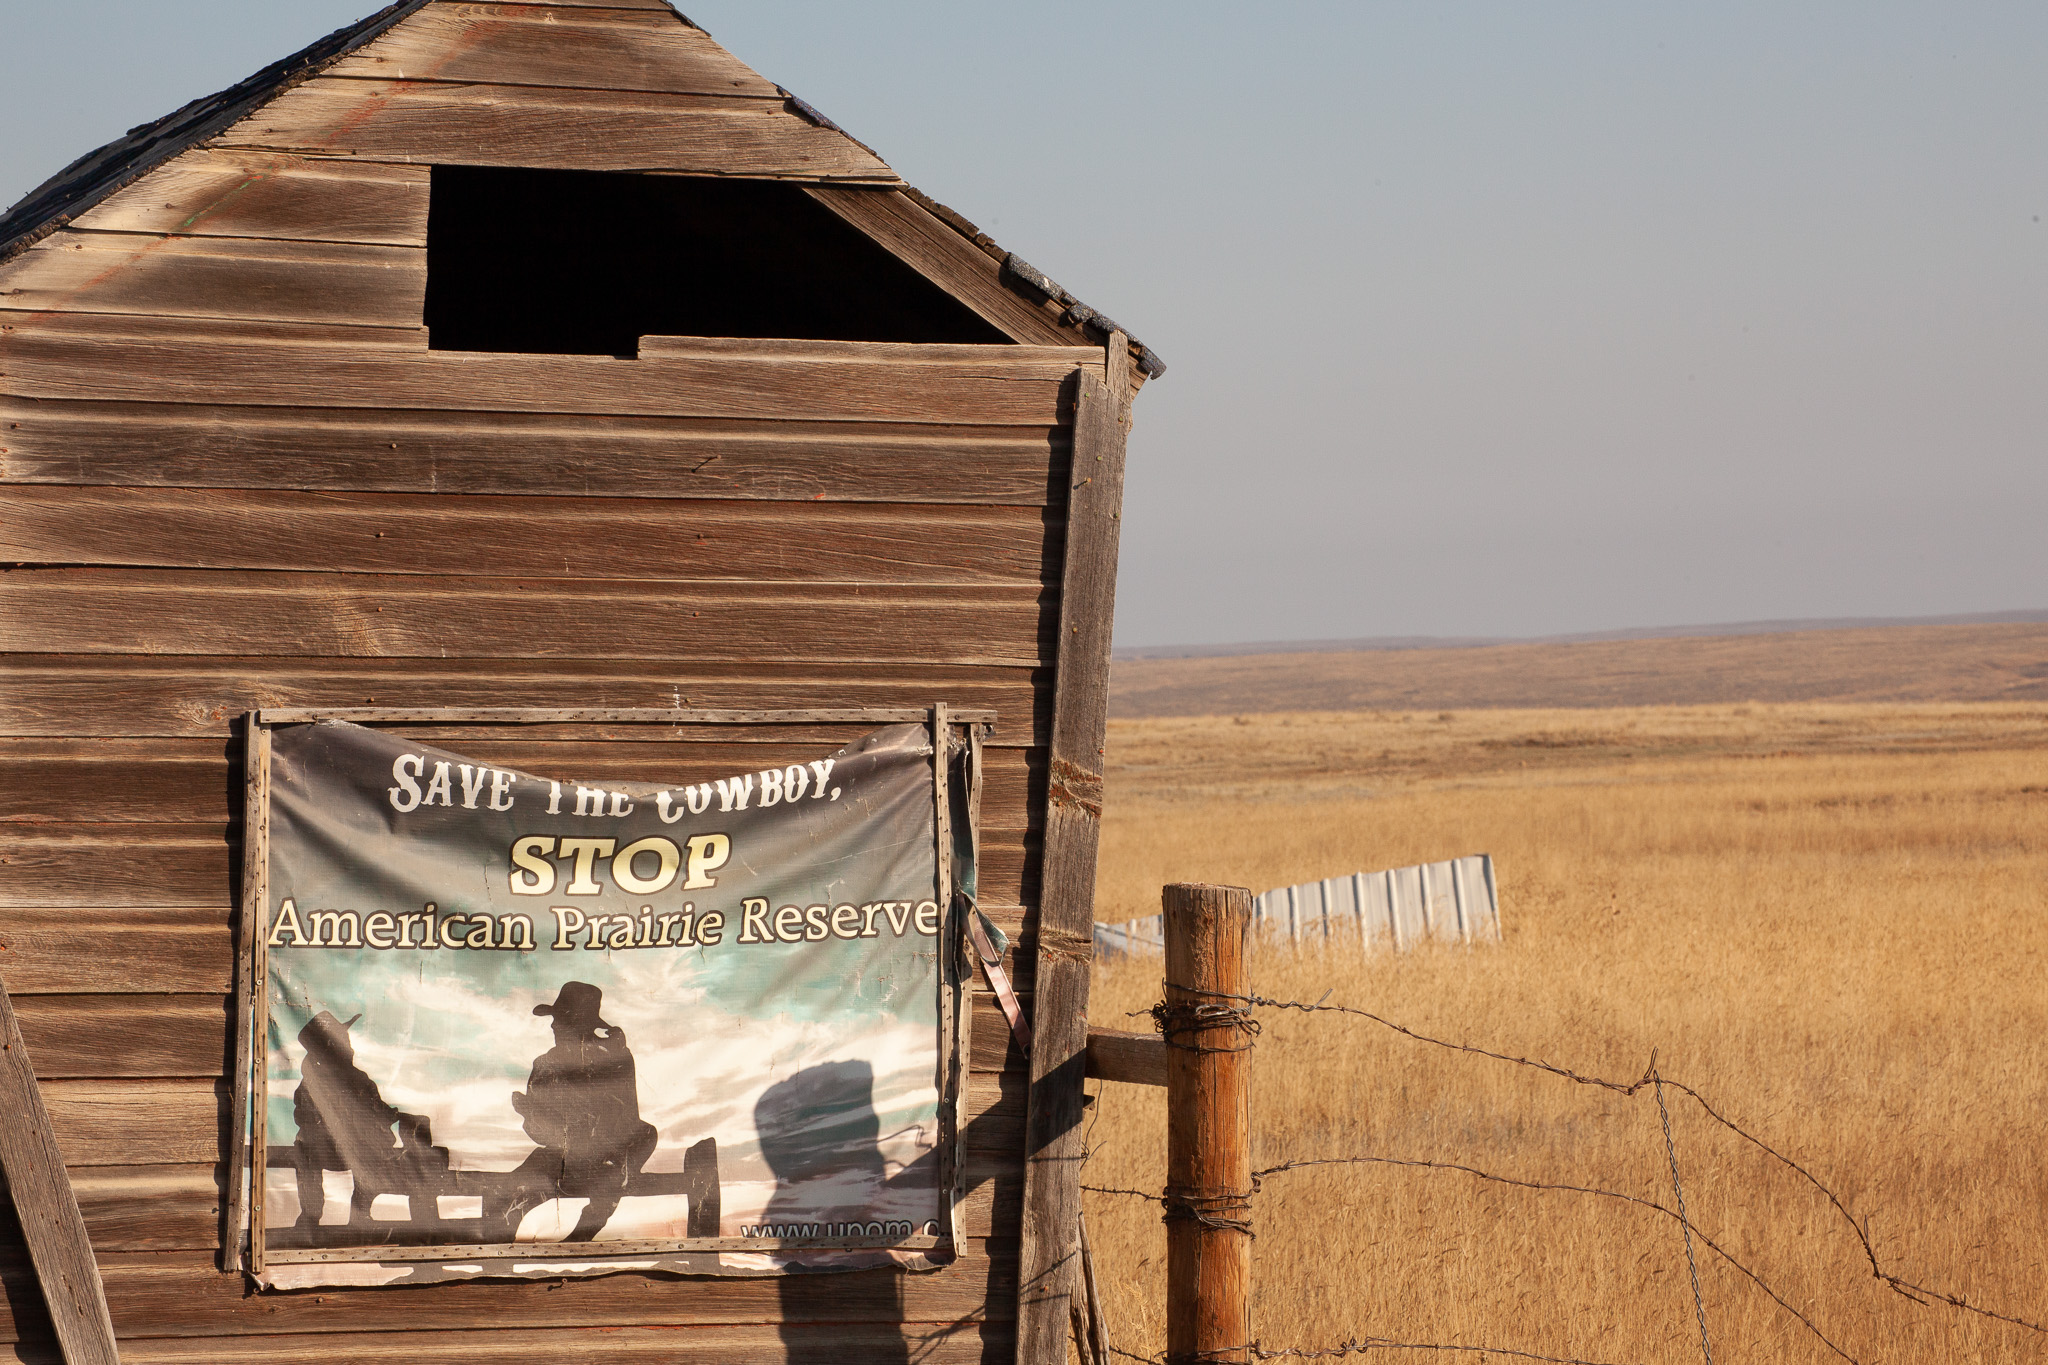 An anti-American Prairie Reserve sign on the wall of an old barn.